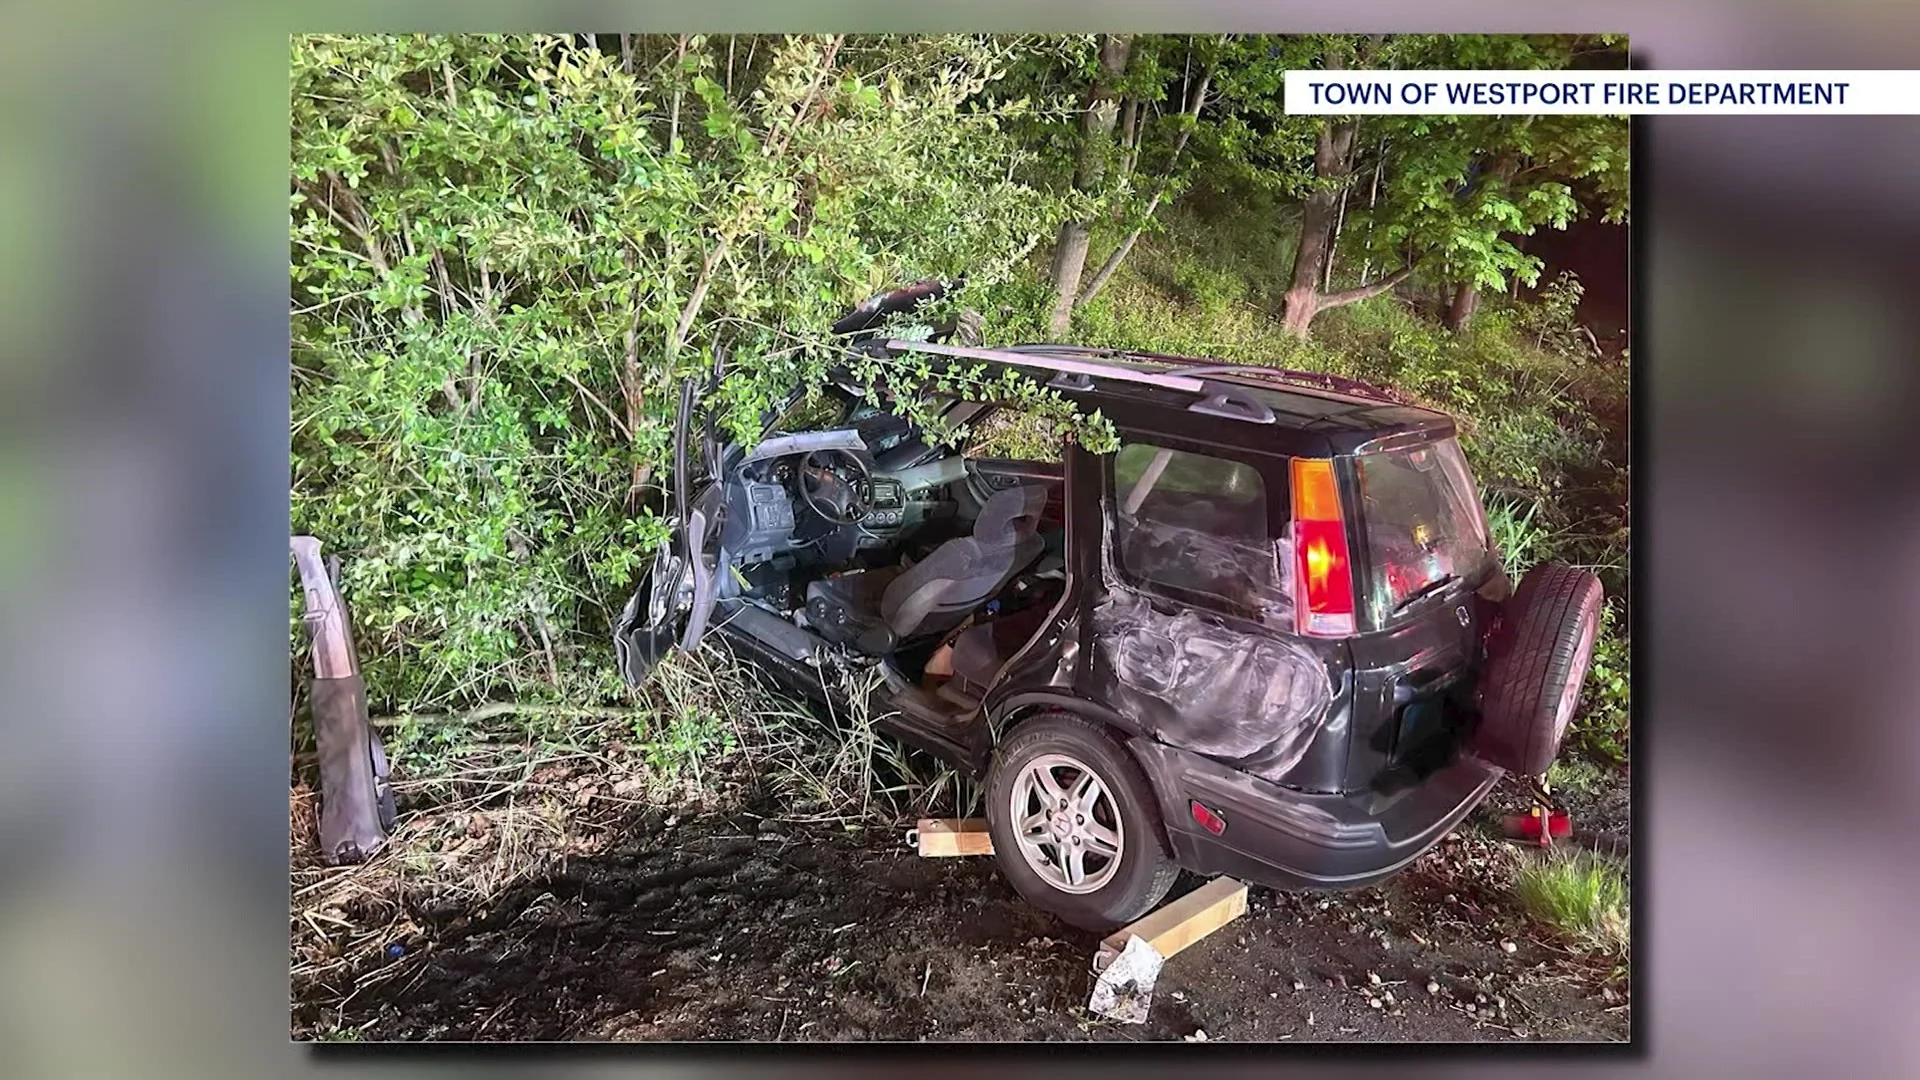 Driver extricated from vehicle after I-95 crash – News 12 Connecticut